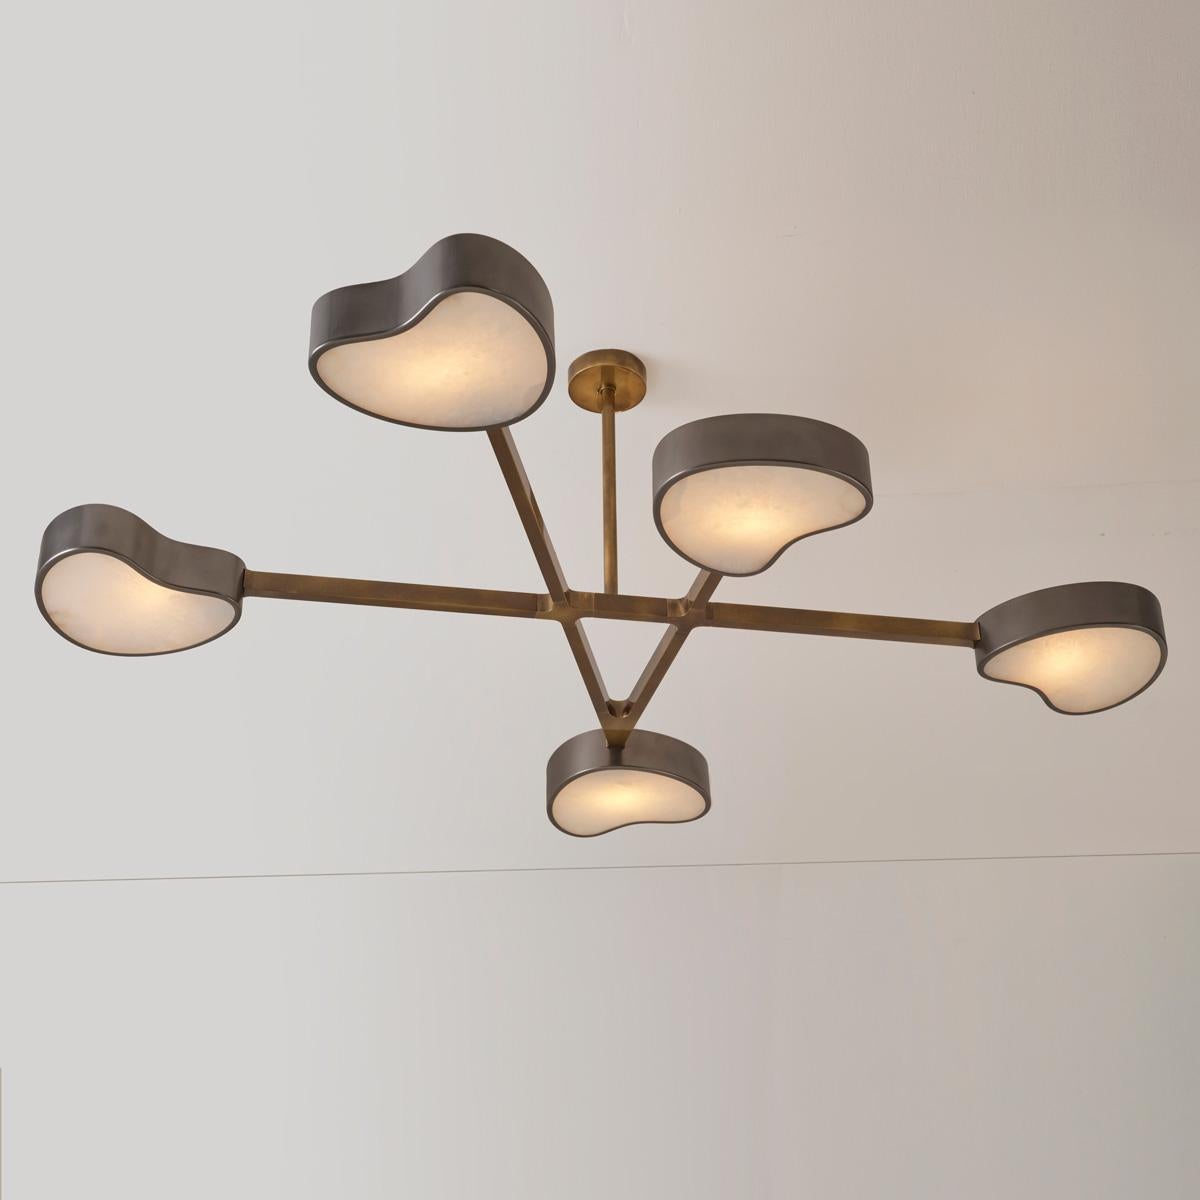 Cuore N.5 Ceiling Light by Gaspare Asaro. Satin Brass and Sand White Finish For Sale 2